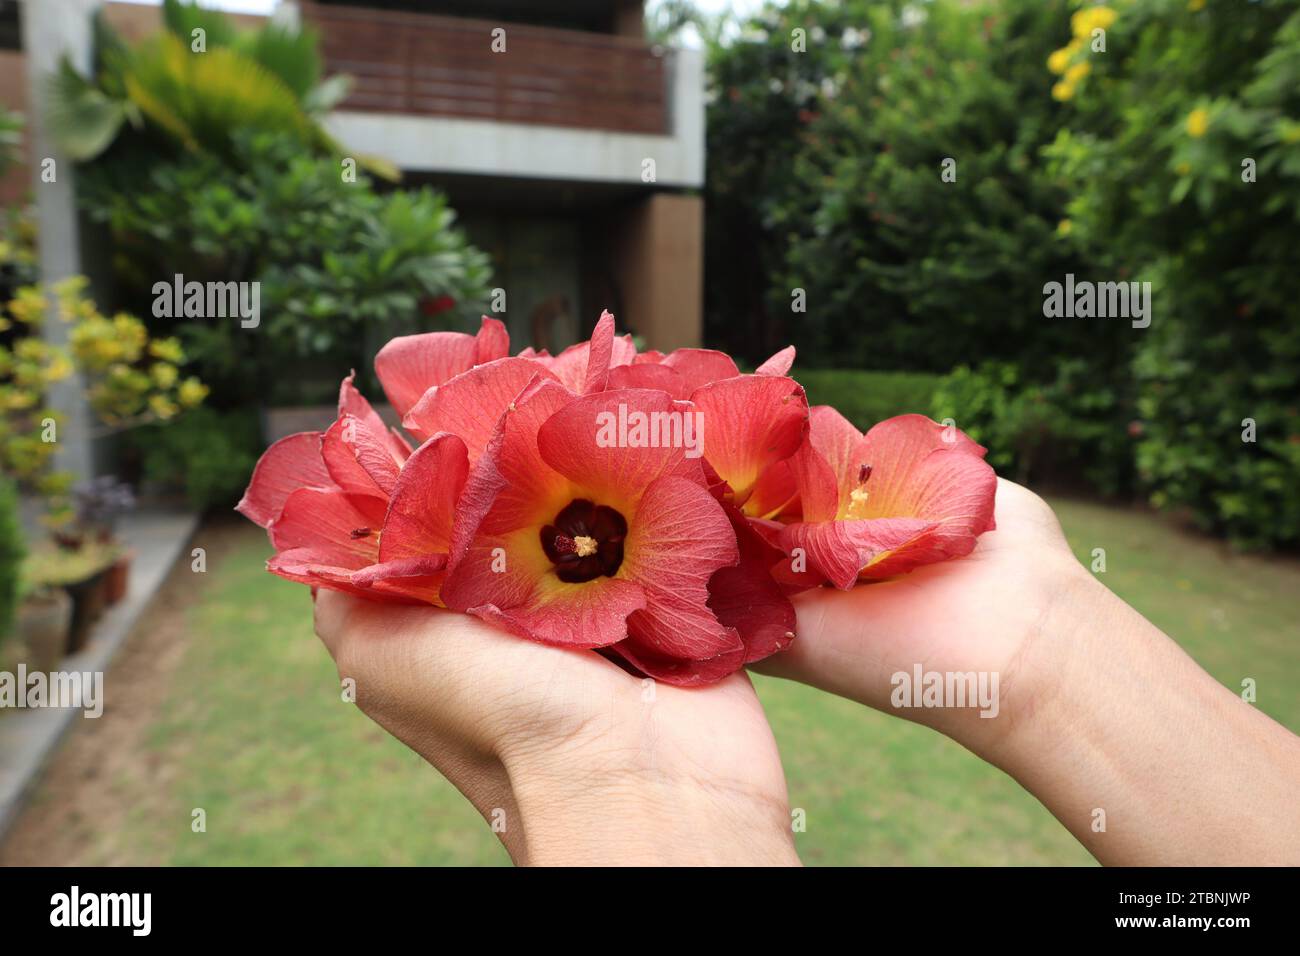 Female holding Beautiful Sea Hibiscus also known as hibiscus tiliaceus on green grass. Bright red shaded with yellow and orange petals coastal hibiscu Stock Photo